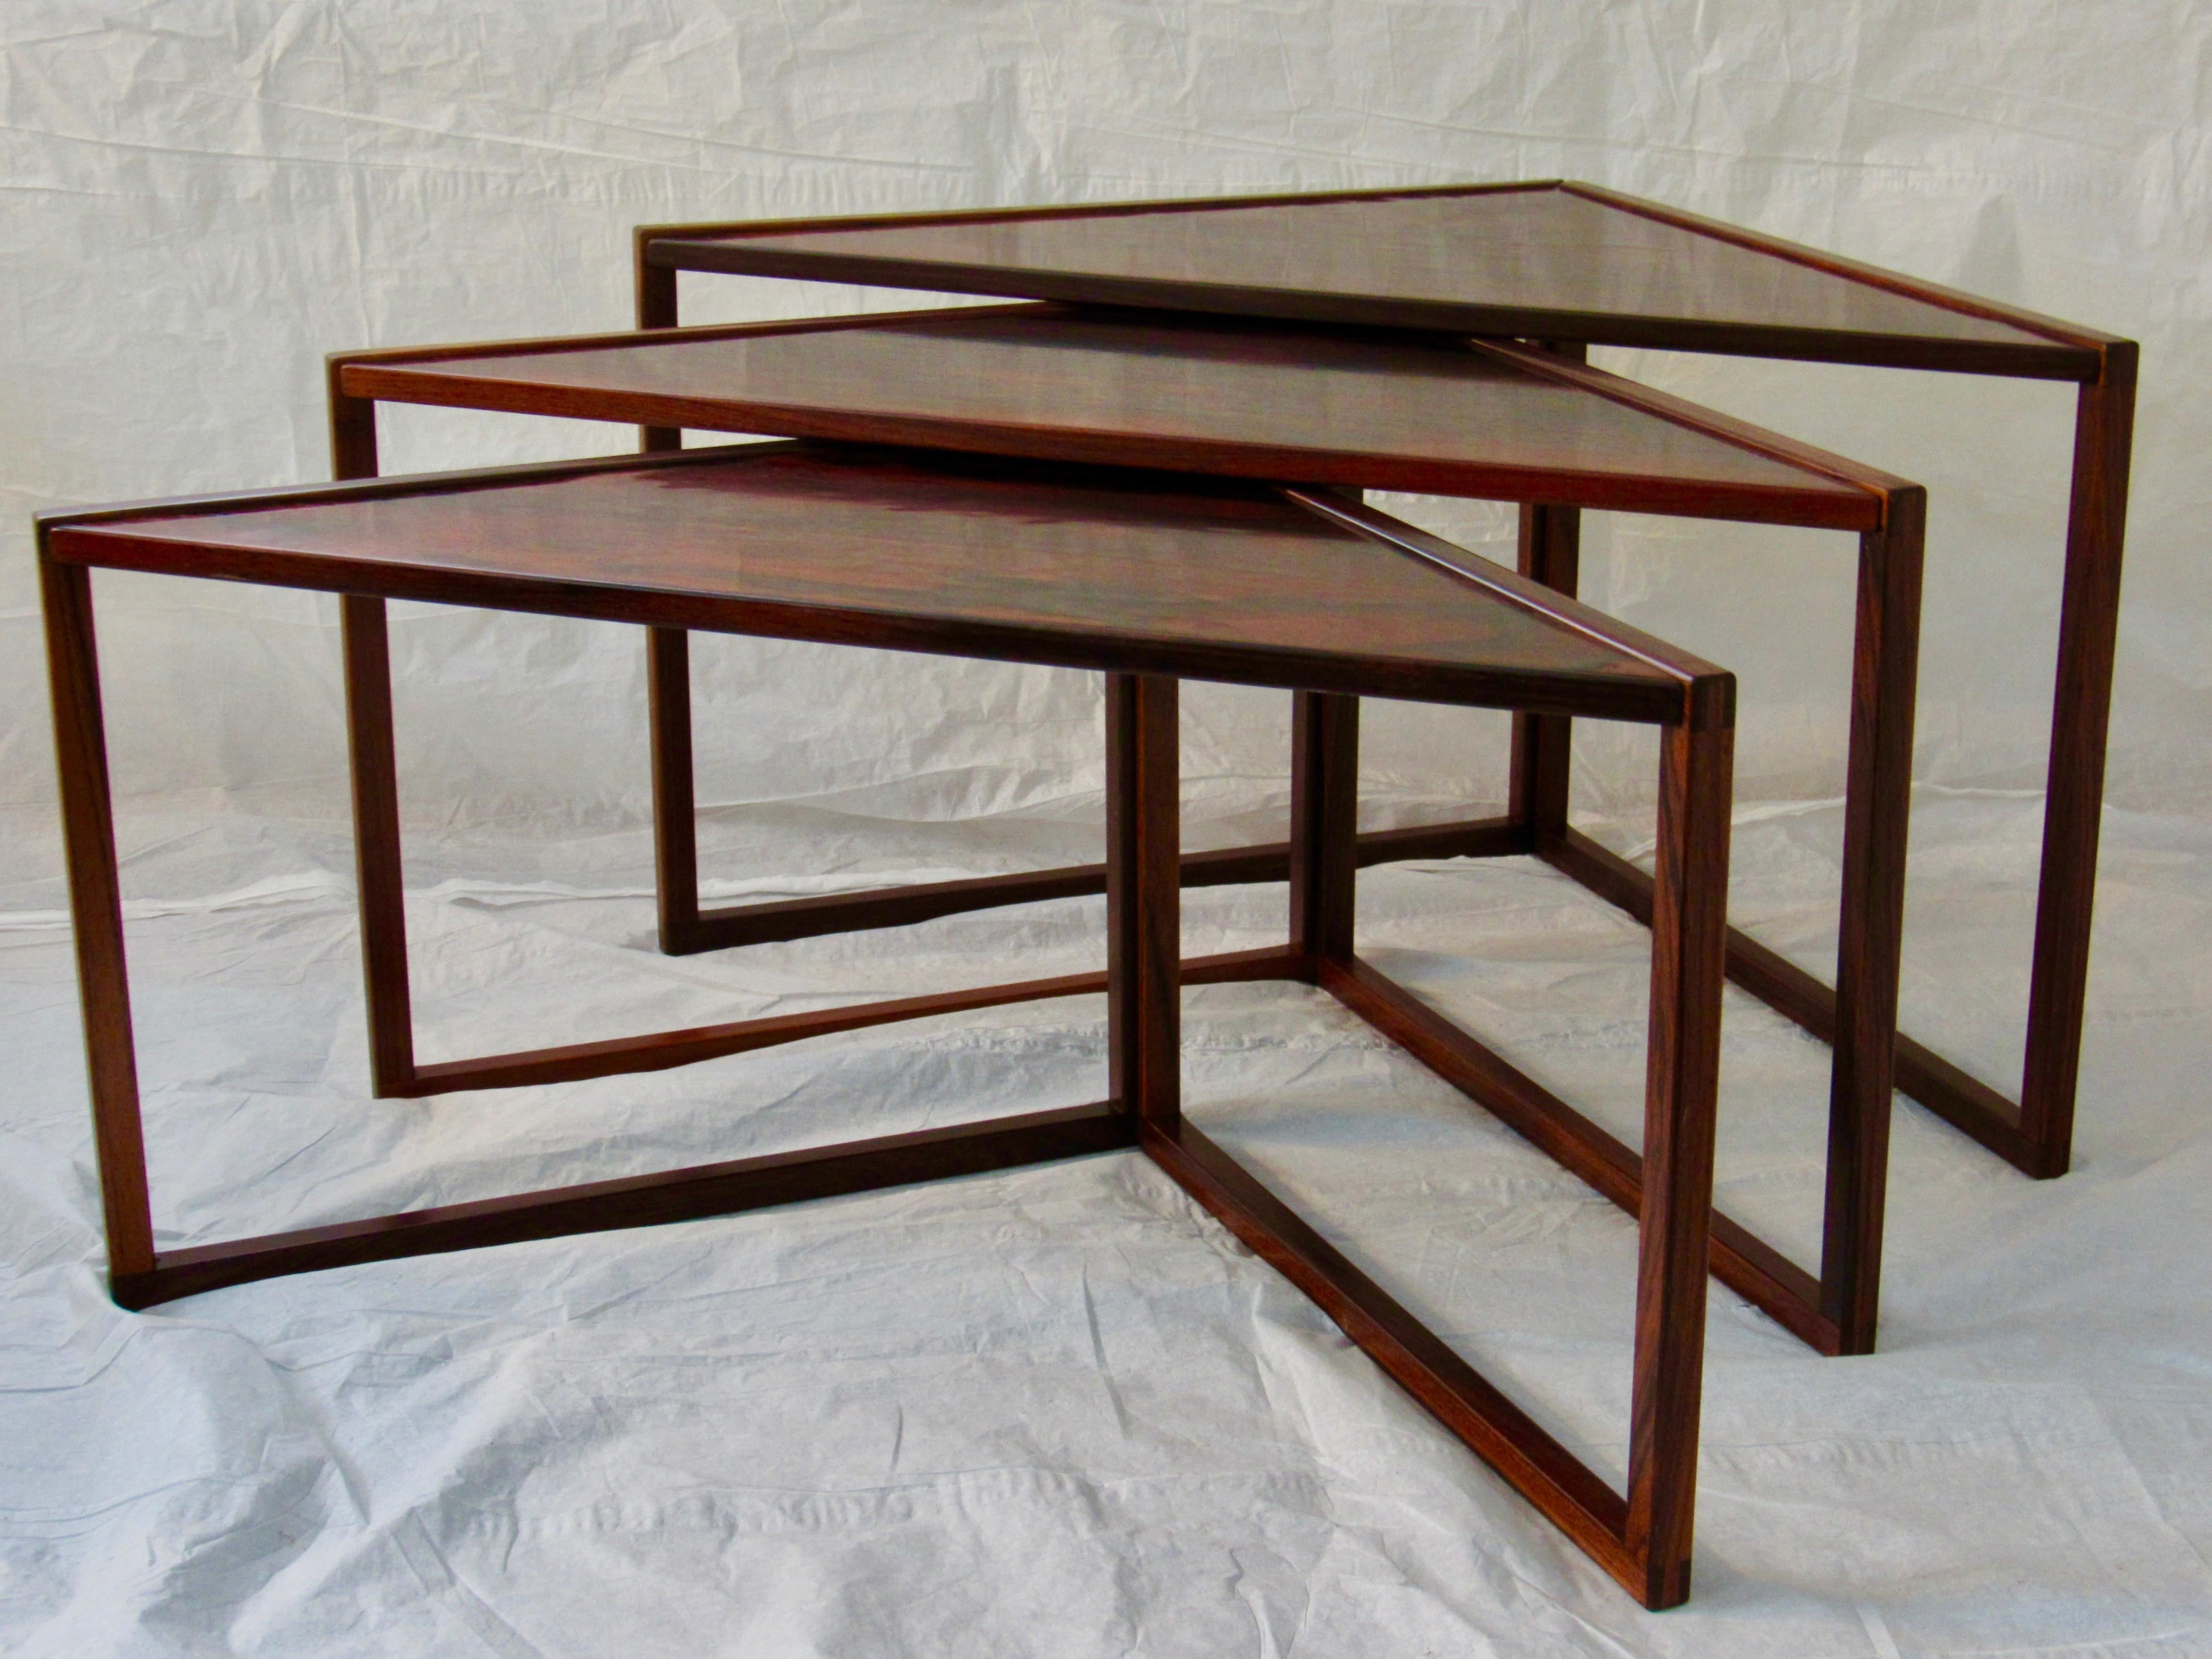 Kai Kristiansen for Vildbjerg Mobelfabrik design rare set of 3 rosewood nesting tables produced in Denmark, 1960. 
The beautifully grained Brazilian rosewood veneer sets within solid rosewood frames. 
This nesting table by Kai Kristiansen is listed